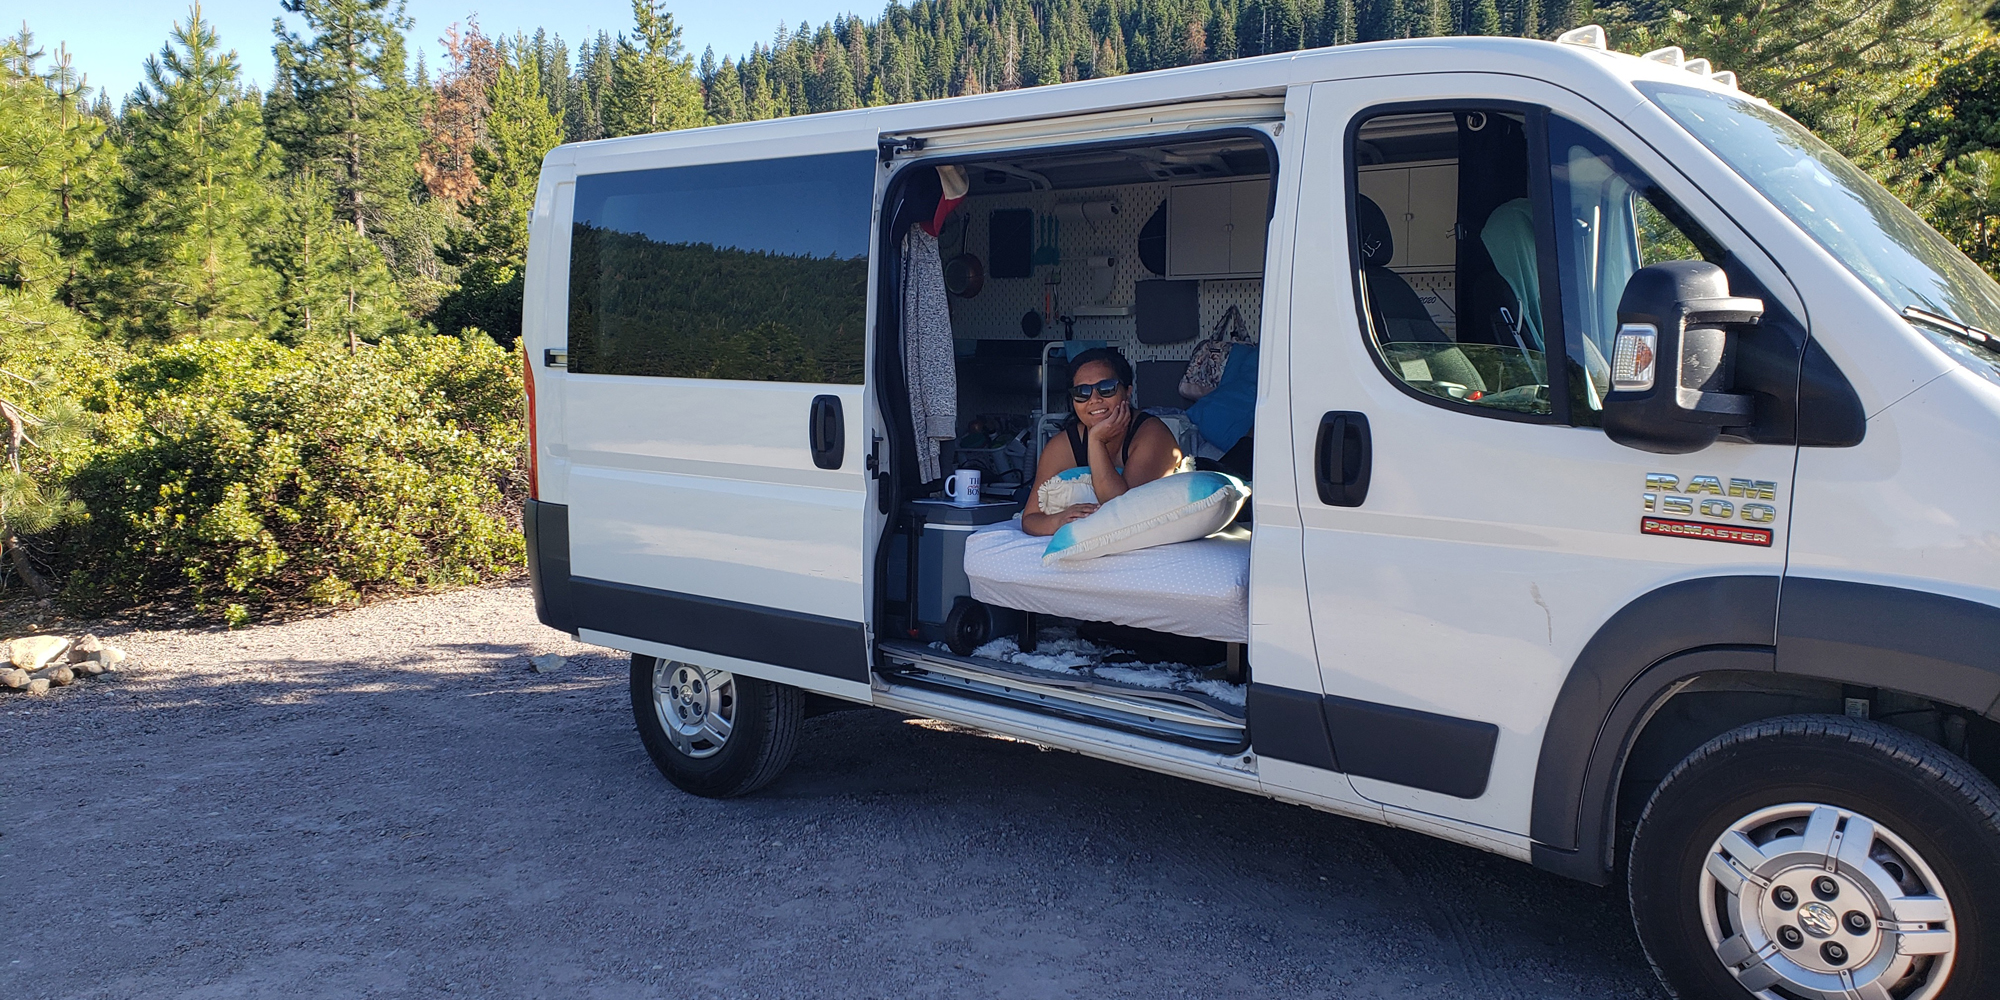 A Sacramento couple spent $1,000 at Ikea to turn a Ram van into a DIY tiny home called ‘Flippie’